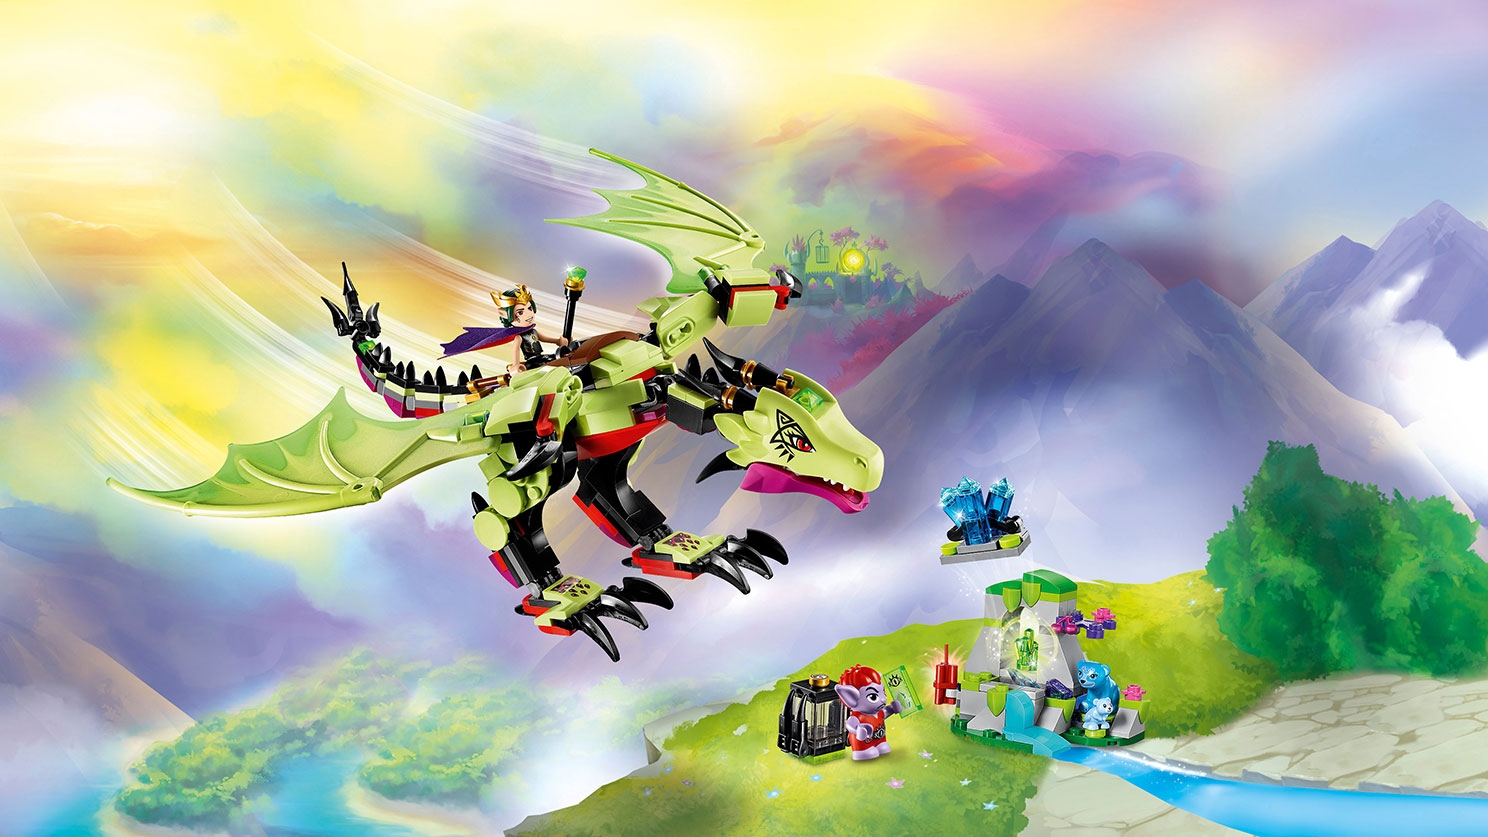 LEGO Elves - 41183 The Goblin King's Evil Dragon - Fly with the Goblin King on the back of his mind-controlled dragon, as he hunts for crystals to power his portal!